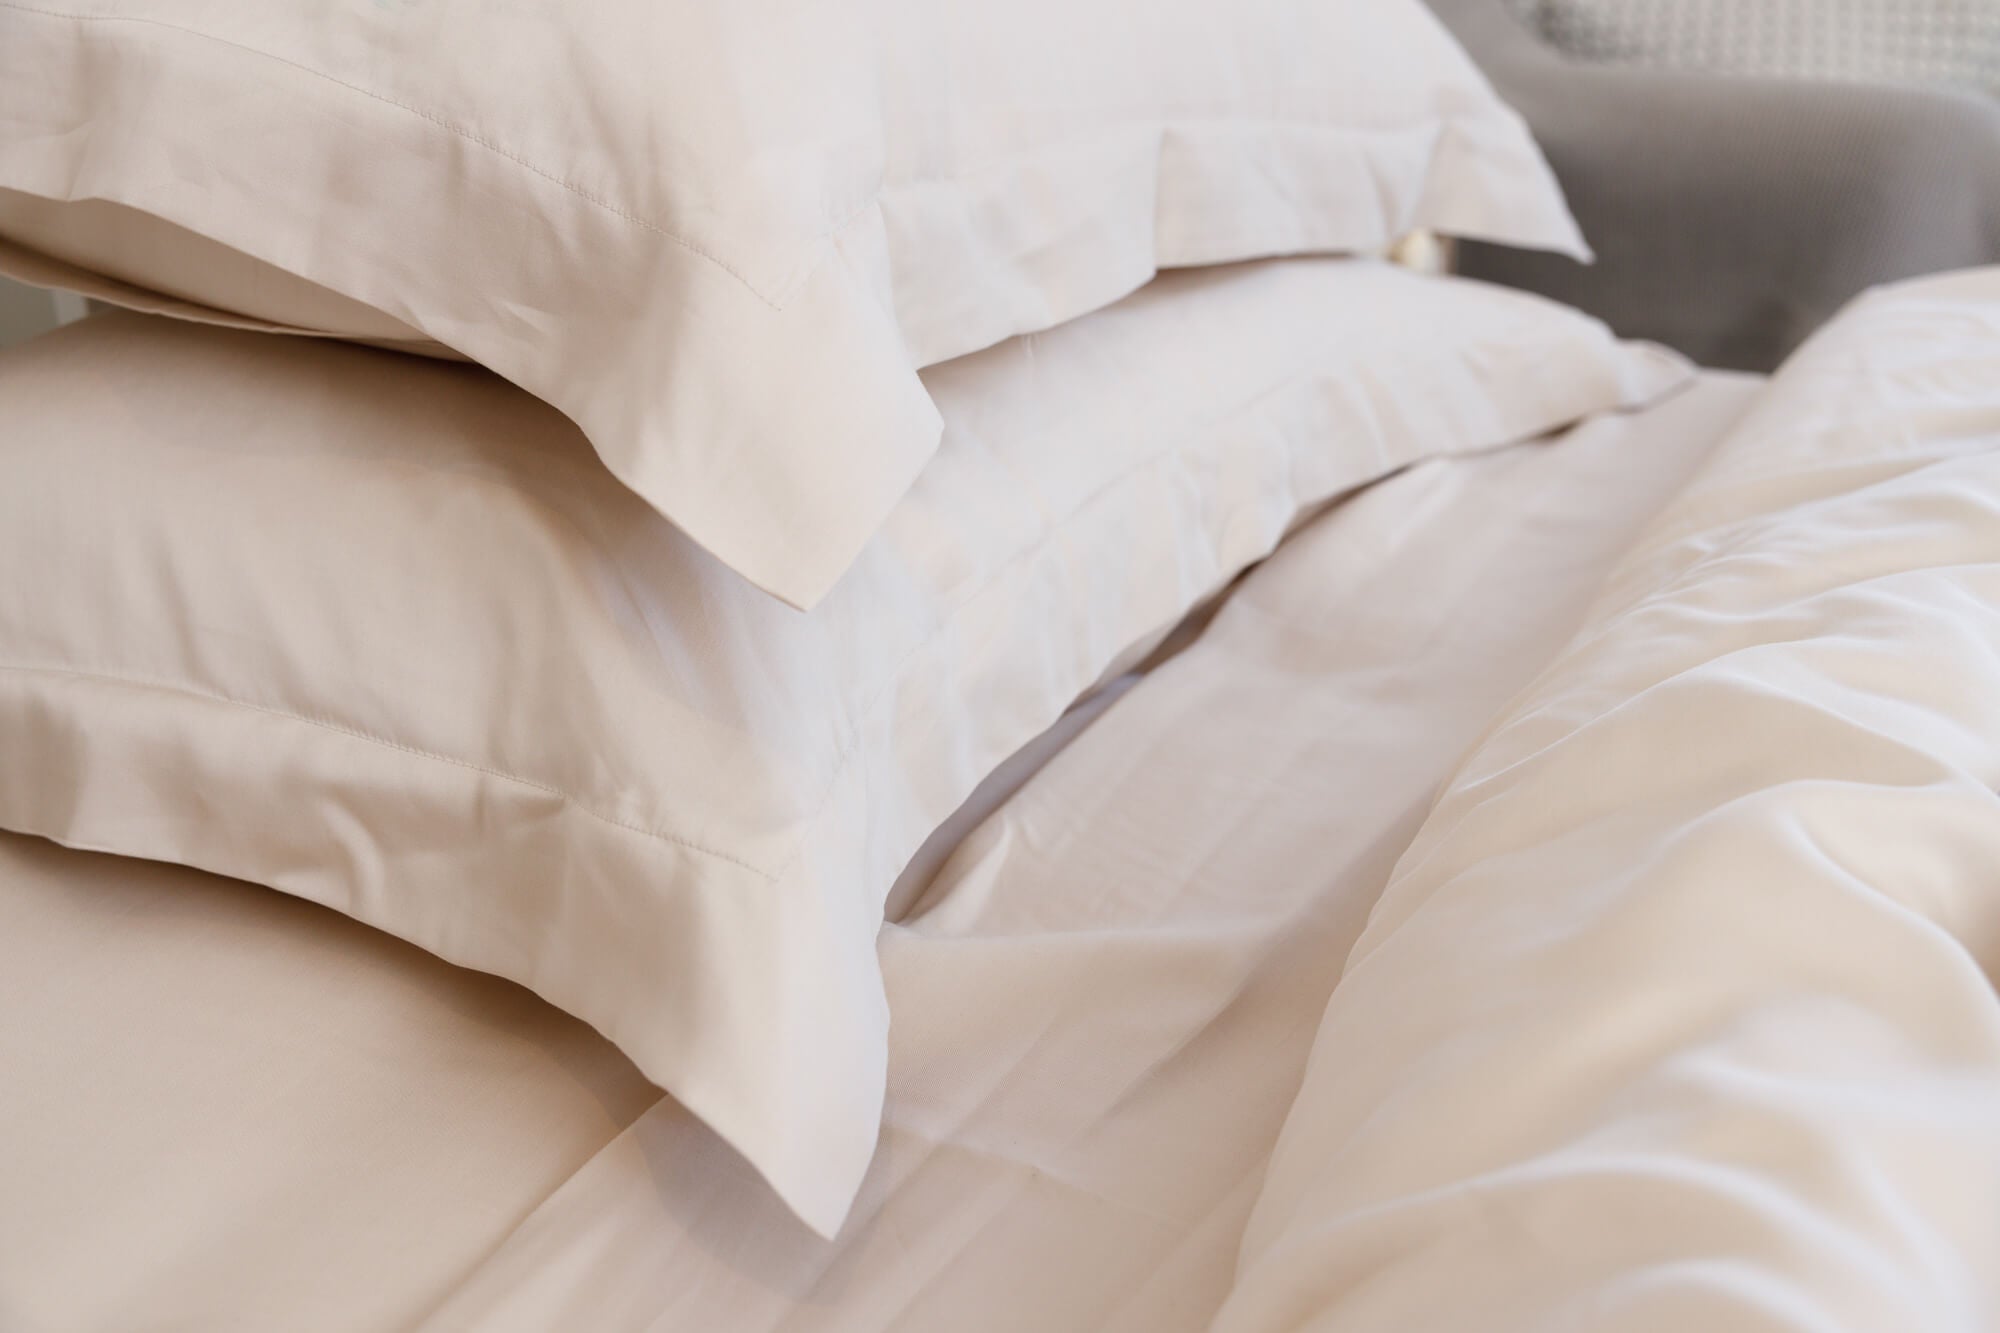 5 Benefits of Sleeping in Cotton Sleepwear and on Cotton Sheets